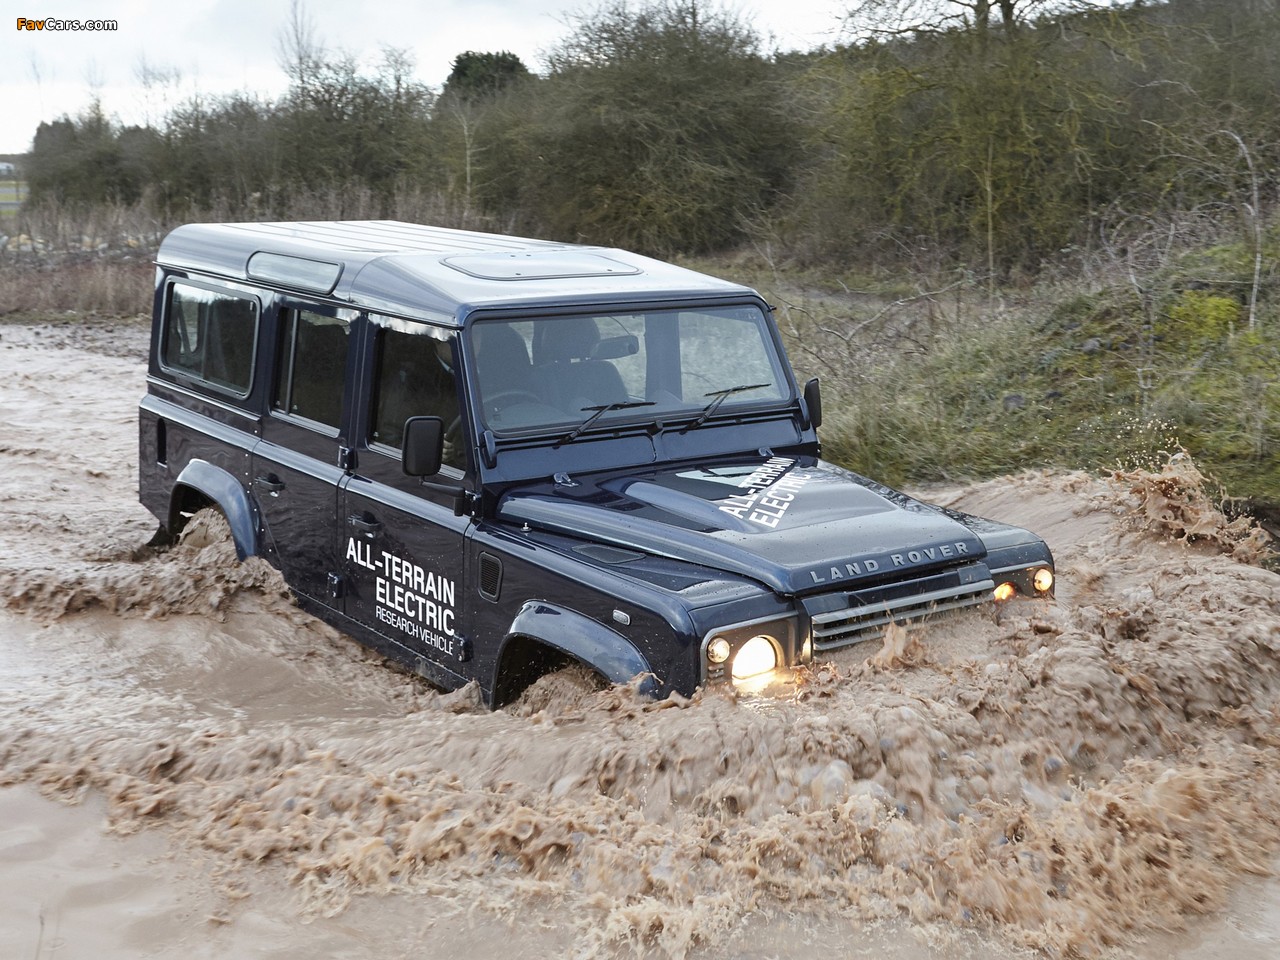 Images of Land Rover Electric Defender Research Vehicle 2013 (1280 x 960)